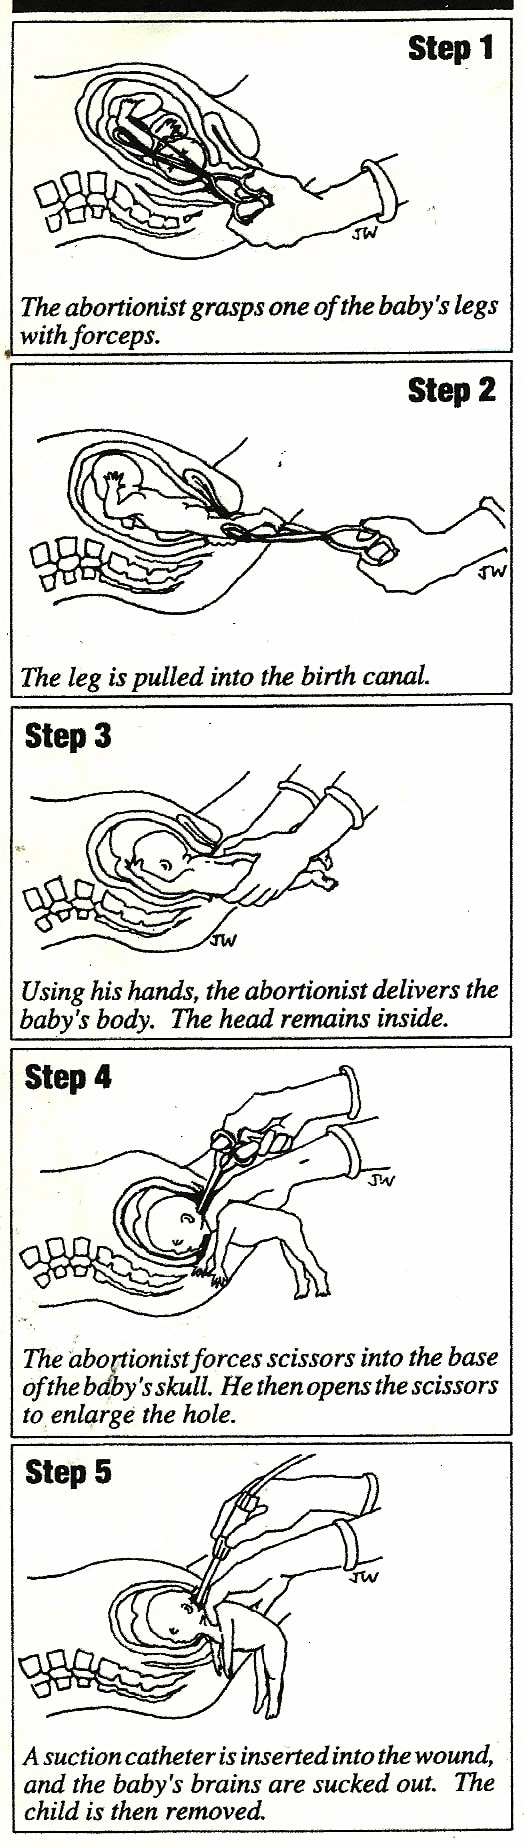 drawings of a D&X (dilation and extraction) abortion procedure, also called partial-birth abortion